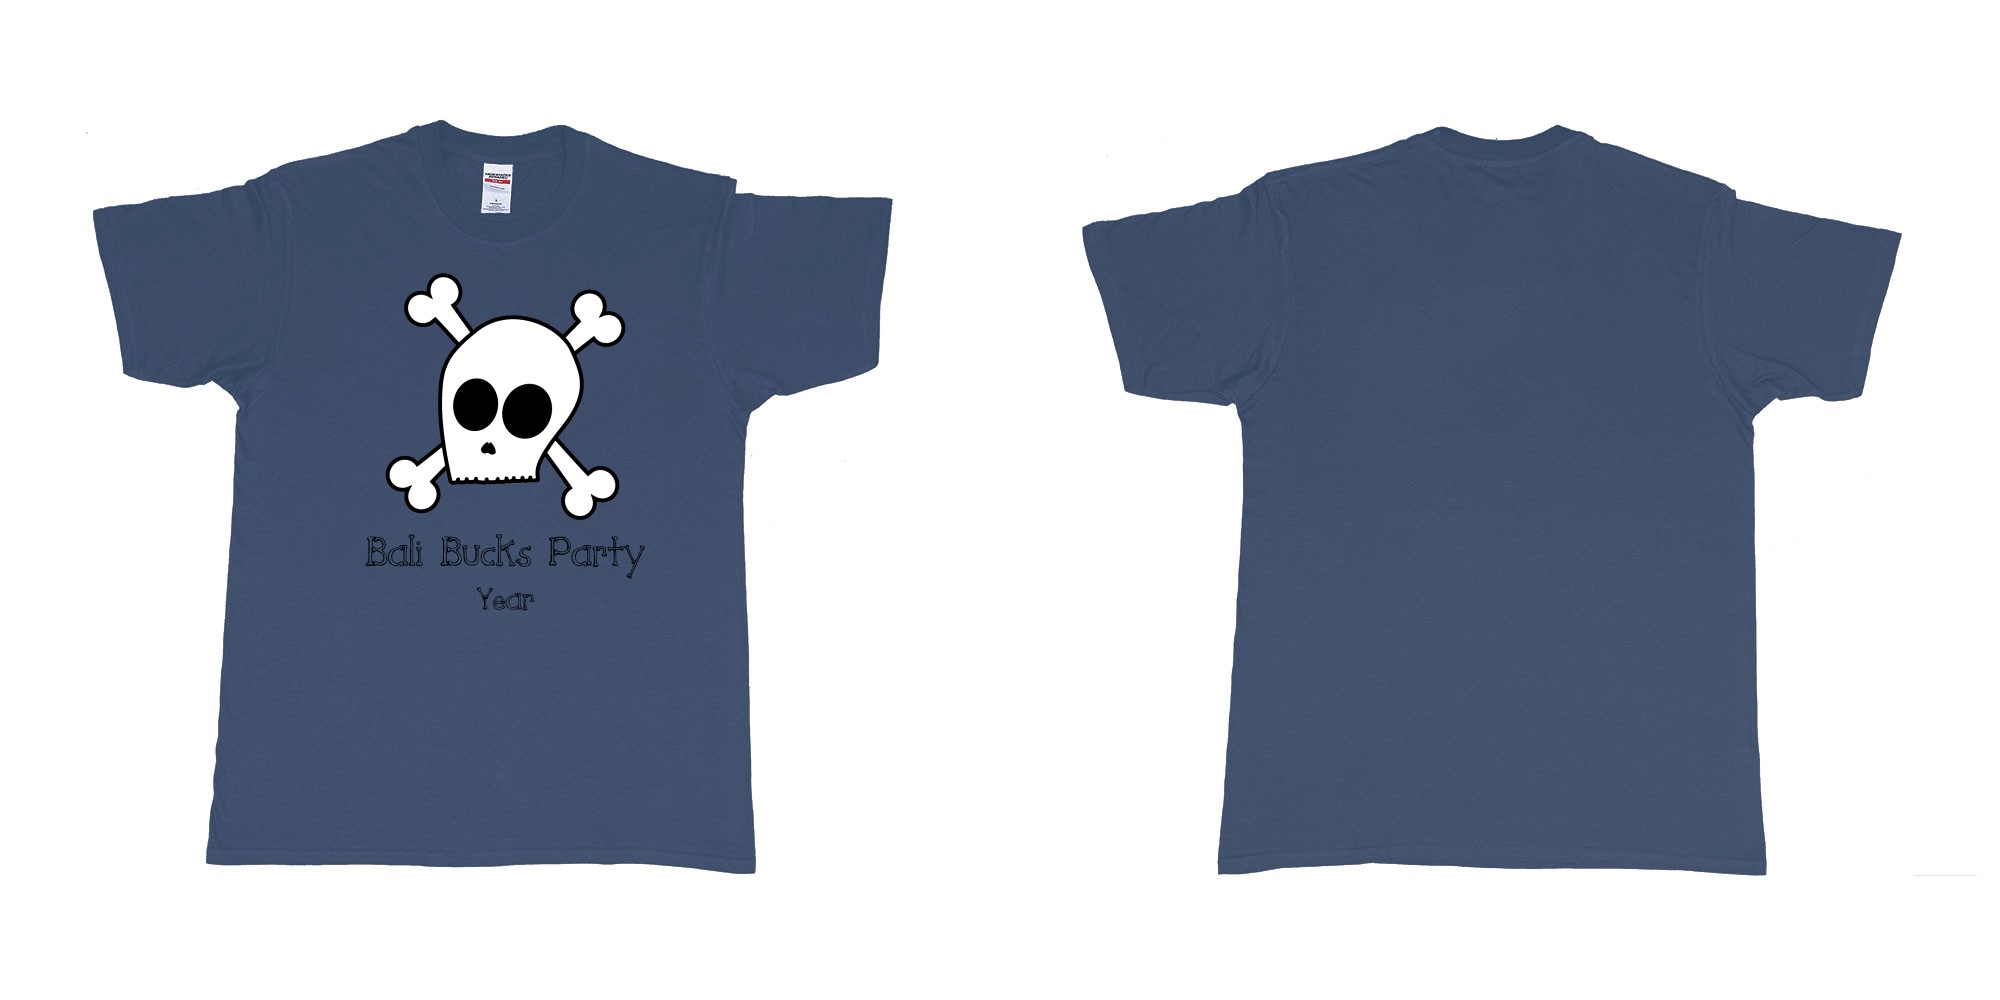 Custom tshirt design bali bucks party skull in fabric color navy choice your own text made in Bali by The Pirate Way